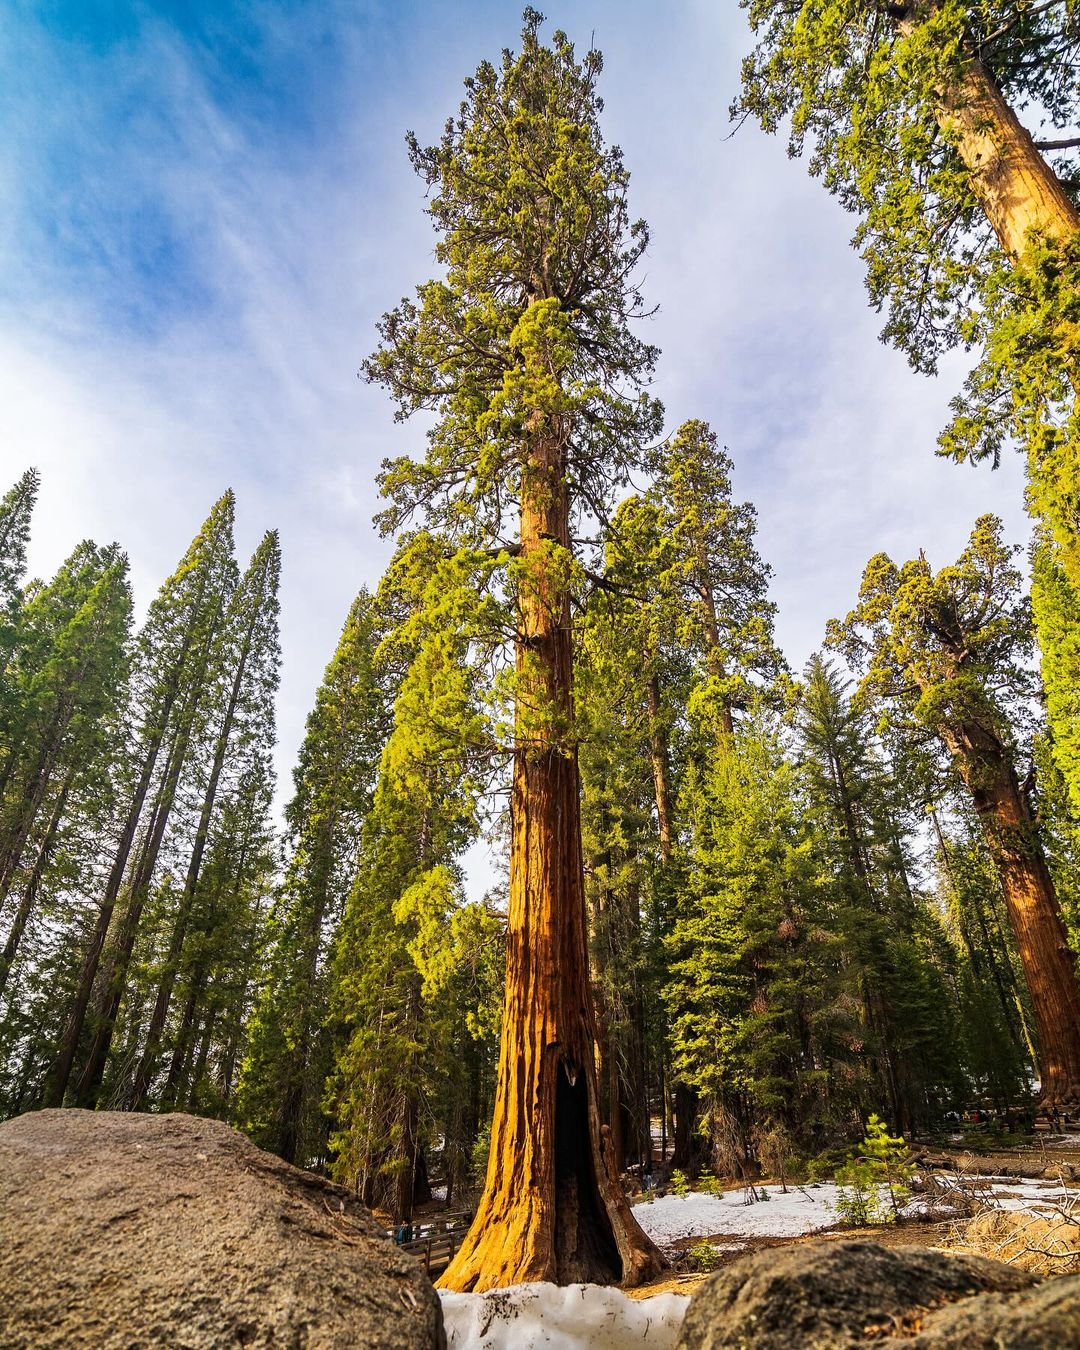 Majestic Sequoia tree standing tall in the forest, symbolizing strength and resilience.